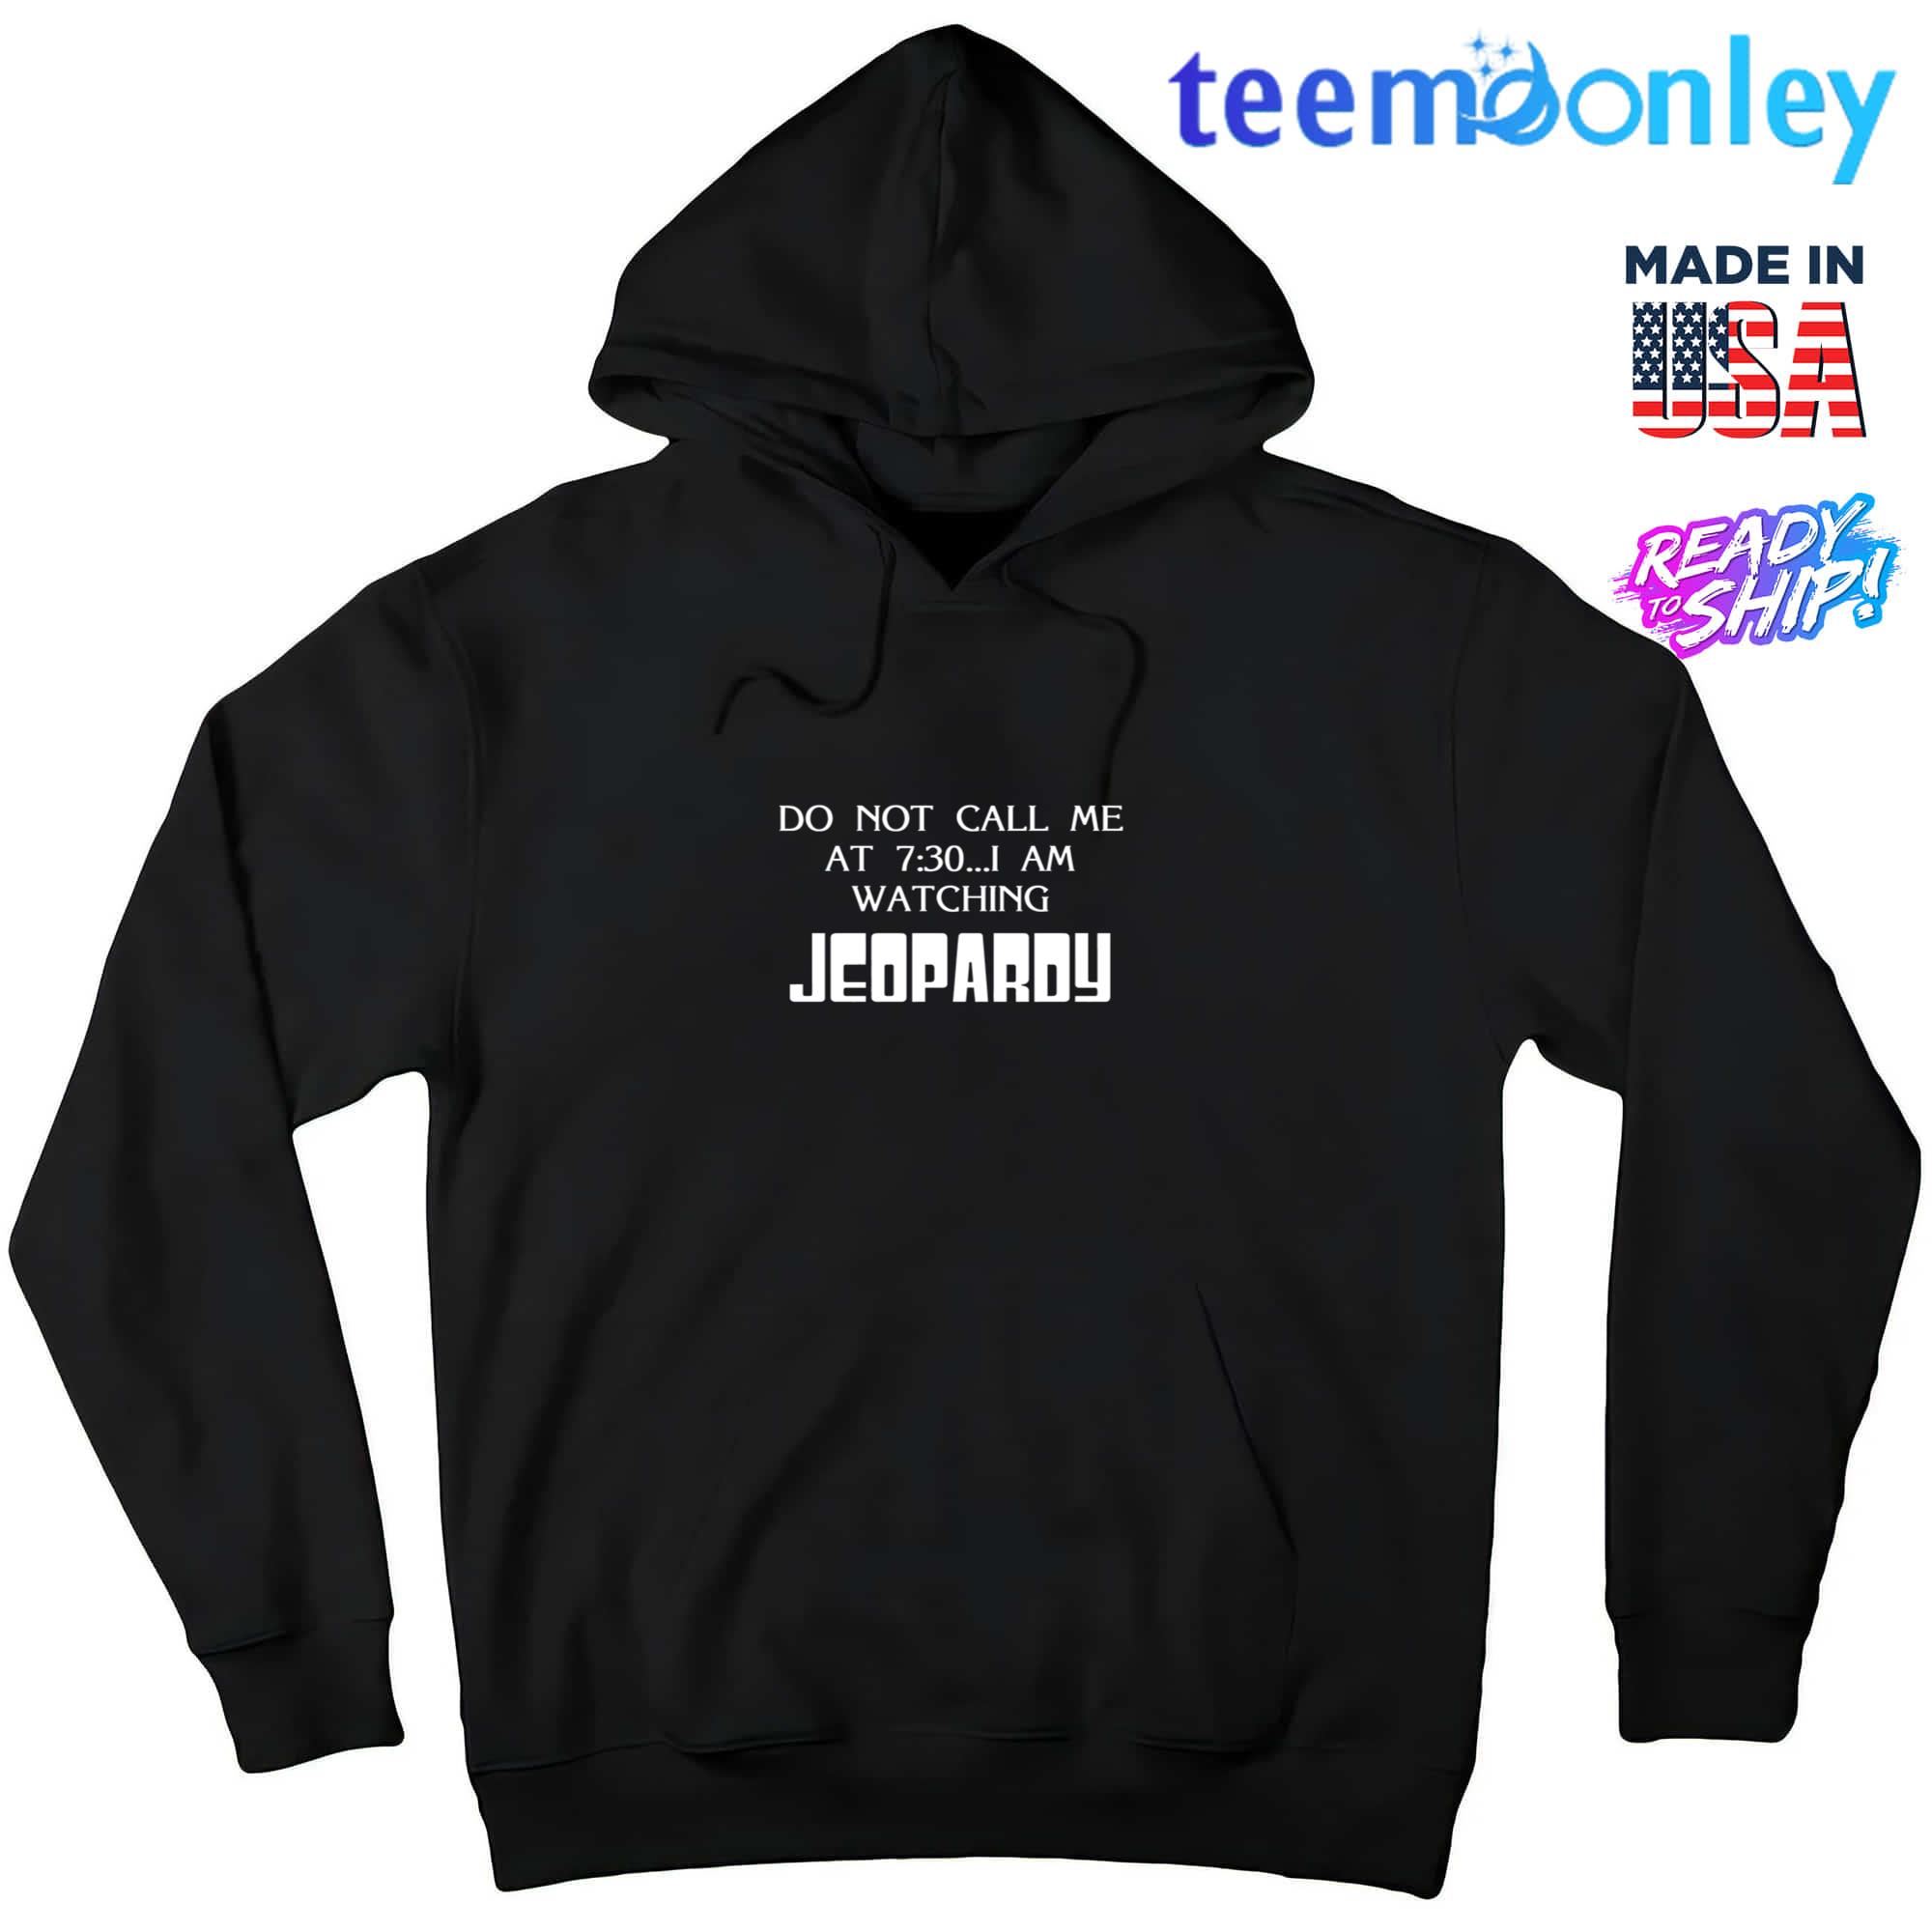 Do Not Call Me At 7 30 I Am Watching Jeopardy Shirt | Teemoonley.com